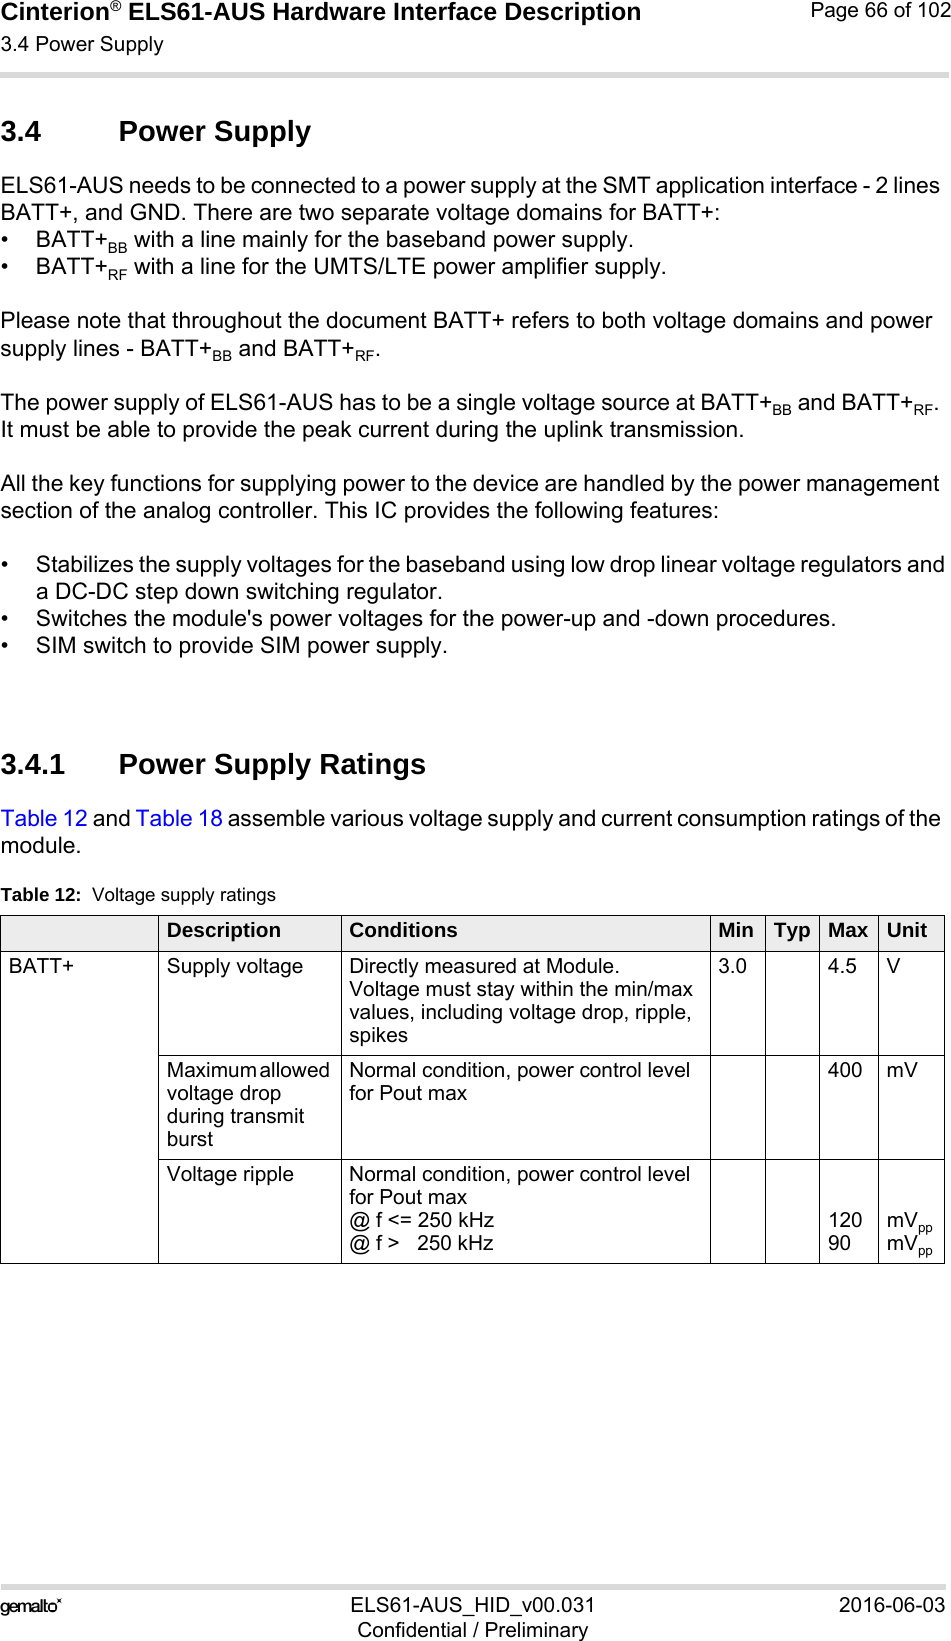 Cinterion® ELS61-AUS Hardware Interface Description3.4 Power Supply73ELS61-AUS_HID_v00.031 2016-06-03Confidential / PreliminaryPage 66 of 1023.4 Power SupplyELS61-AUS needs to be connected to a power supply at the SMT application interface - 2 lines BATT+, and GND. There are two separate voltage domains for BATT+:•BATT+BB with a line mainly for the baseband power supply.•BATT+RF with a line for the UMTS/LTE power amplifier supply.Please note that throughout the document BATT+ refers to both voltage domains and power supply lines - BATT+BB and BATT+RF.The power supply of ELS61-AUS has to be a single voltage source at BATT+BB and BATT+RF. It must be able to provide the peak current during the uplink transmission. All the key functions for supplying power to the device are handled by the power management section of the analog controller. This IC provides the following features:• Stabilizes the supply voltages for the baseband using low drop linear voltage regulators anda DC-DC step down switching regulator.• Switches the module&apos;s power voltages for the power-up and -down procedures.• SIM switch to provide SIM power supply.3.4.1 Power Supply RatingsTable 12 and Table 18 assemble various voltage supply and current consumption ratings of the module. Table 12:  Voltage supply ratingsDescription Conditions Min Typ Max UnitBATT+ Supply voltage  Directly measured at Module.Voltage must stay within the min/max values, including voltage drop, ripple, spikes3.0 4.5 VMaximum allowed voltage drop during transmit burst Normal condition, power control level for Pout max400 mVVoltage ripple  Normal condition, power control level for Pout max@ f &lt;= 250 kHz@ f &gt;   250 kHz12090mVppmVpp